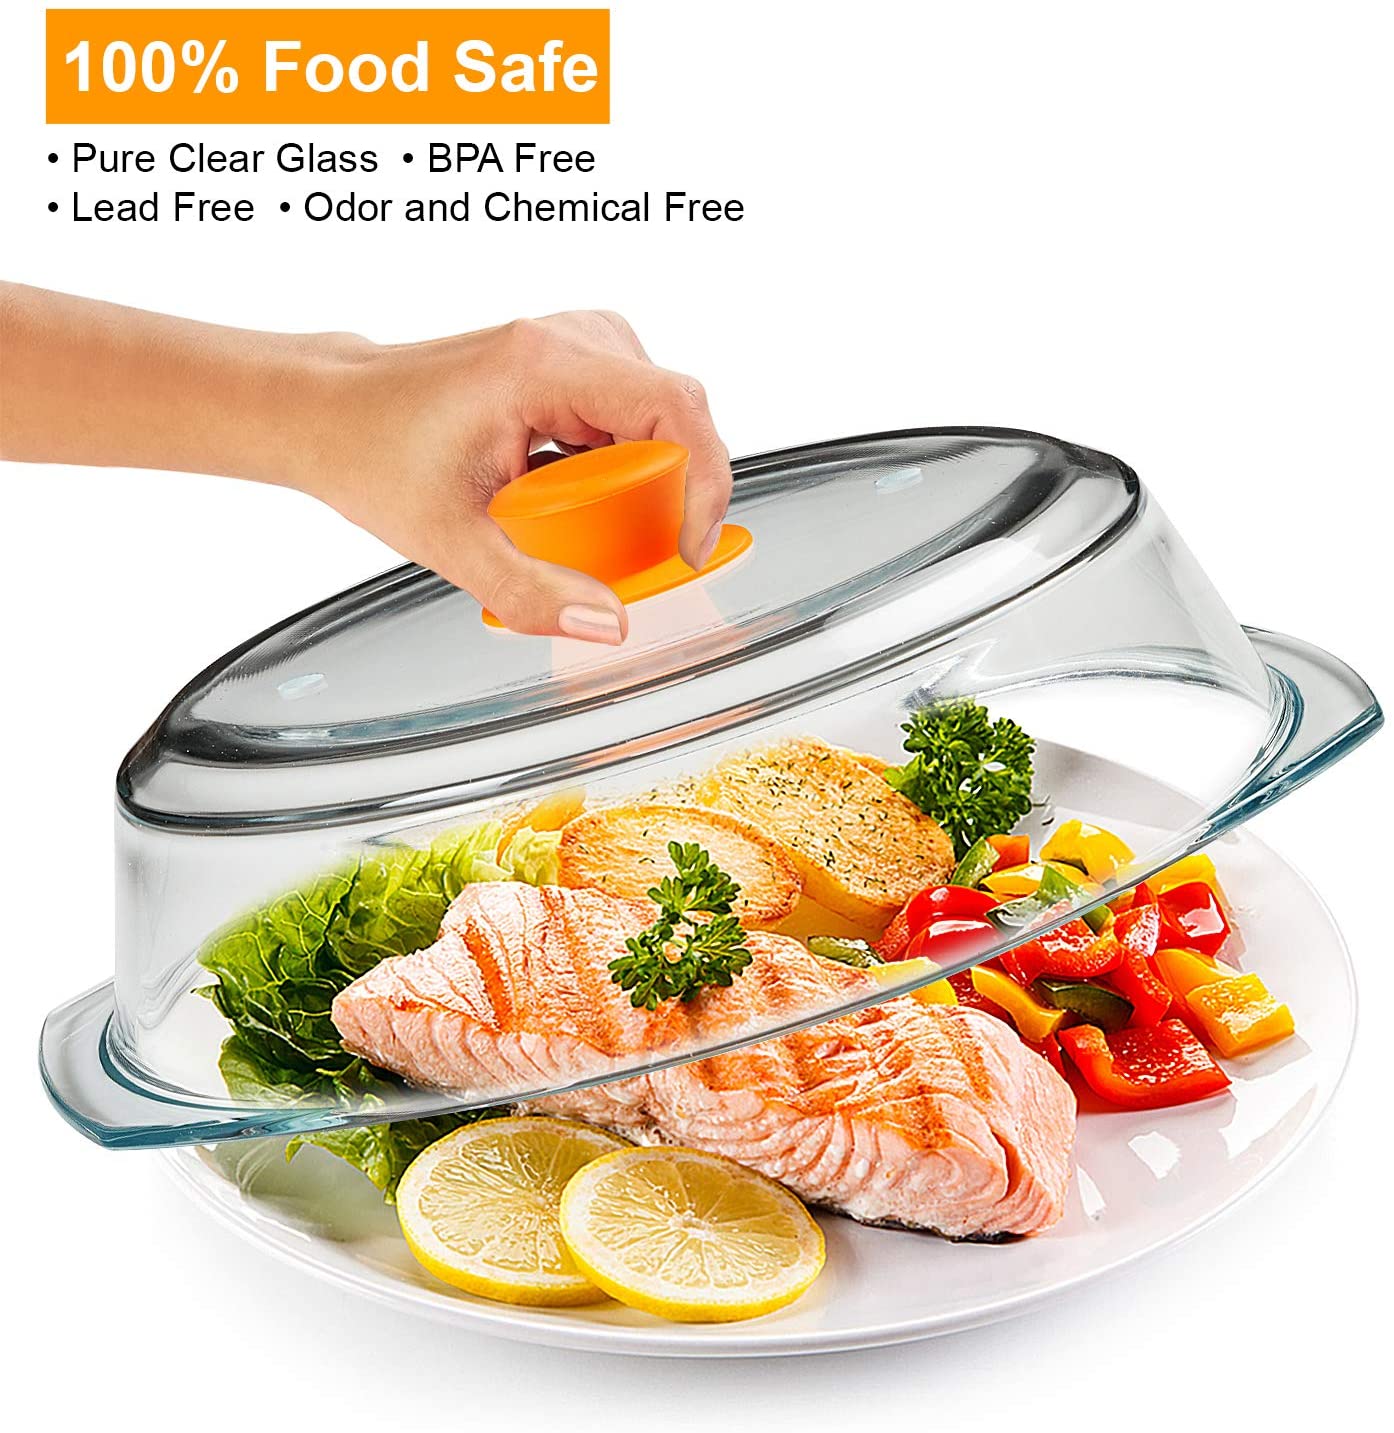 Microwave Cover for Food, Clear Microwave Splatter Cover with